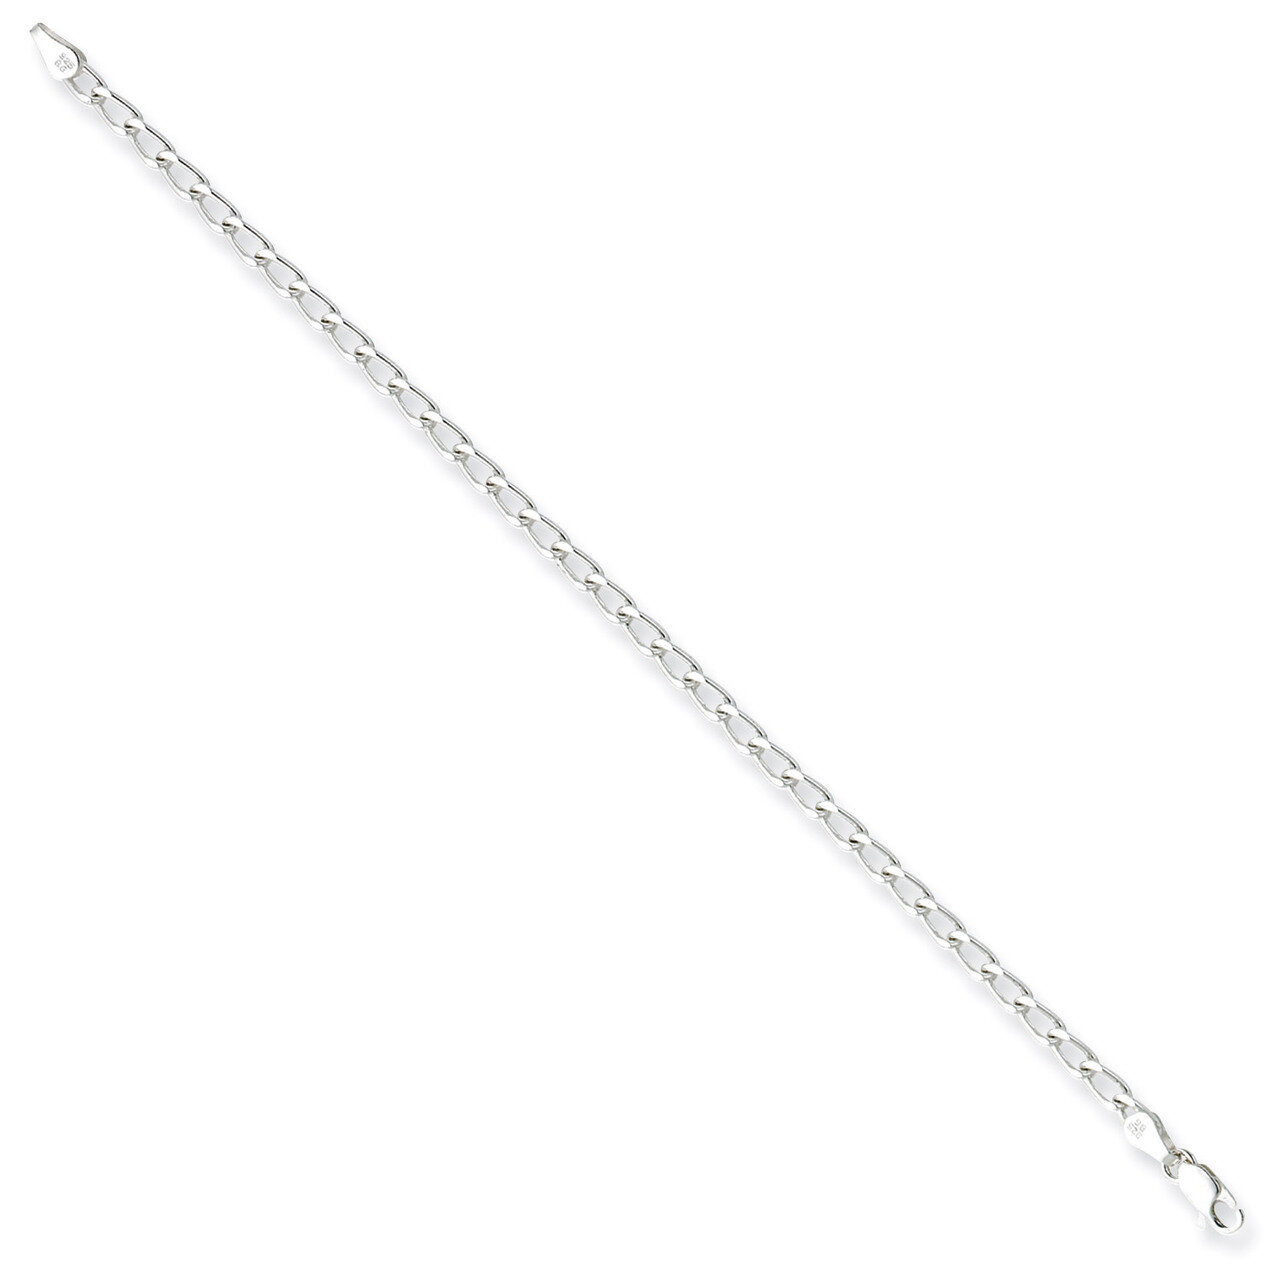 7 Inch 3.2mm Open Link Chain Sterling Silver Rhodium Plated QLL100R-7